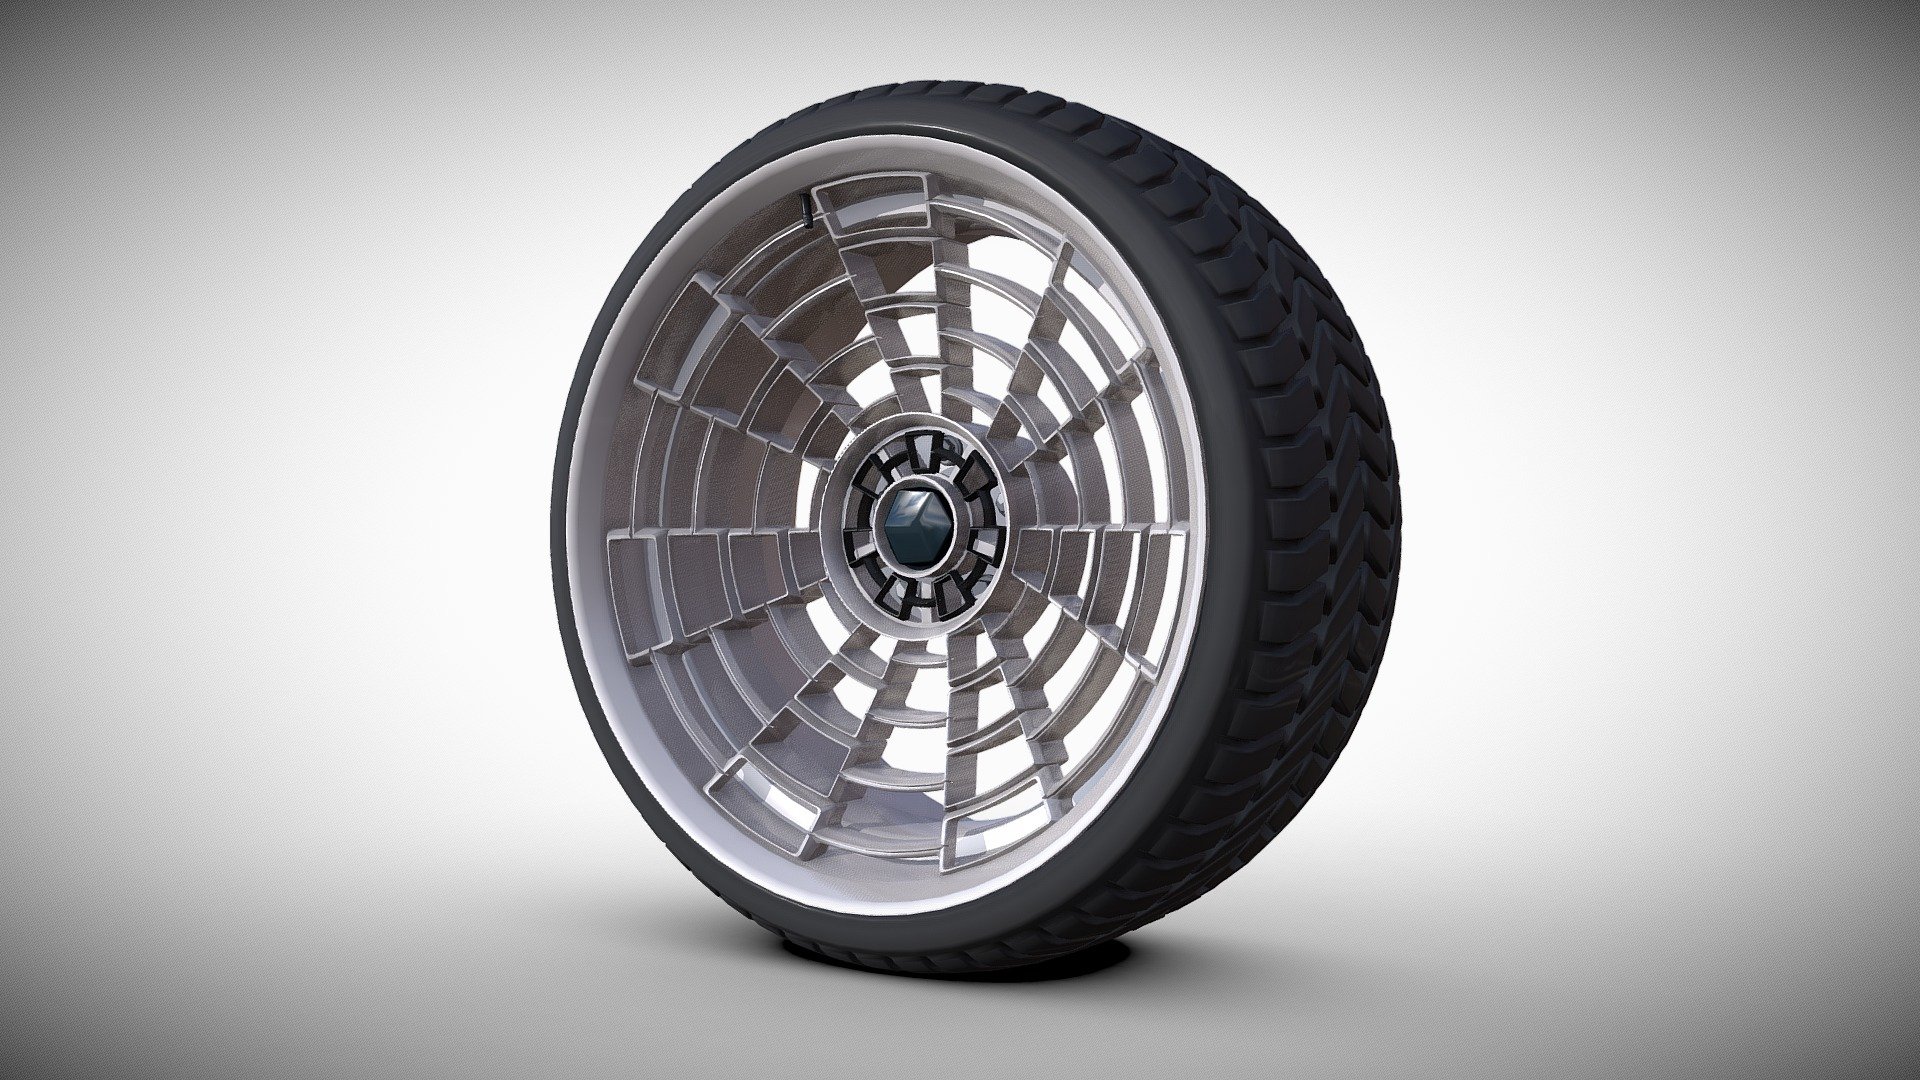 Concept 7 spoke spider web wheel. Design inspired by 70s futurism.

Model contains:

-Rim (16437 verts, 14874 poly) with 4 predescribed materials Rim is splited into 2 separate objects:

Rim consists:


C7SW_Rim (14035 verts, 12630 poly)
C7SW_hubcover (2402 verts, 2244 poly)

Rim materials:


C7SW_trimmat
C7SW_mainmat
C7SW_boltsmat
C7SW_centermat

-Tire C7SWTire with tread (5400 verts, 5340 poly) with 1 predescribed material Tire materials:


Tire_mat

Model is scaled to R17 Center hub is not based on any standard measurements - C7SSW wheel - Buy Royalty Free 3D model by OxS49 3d model